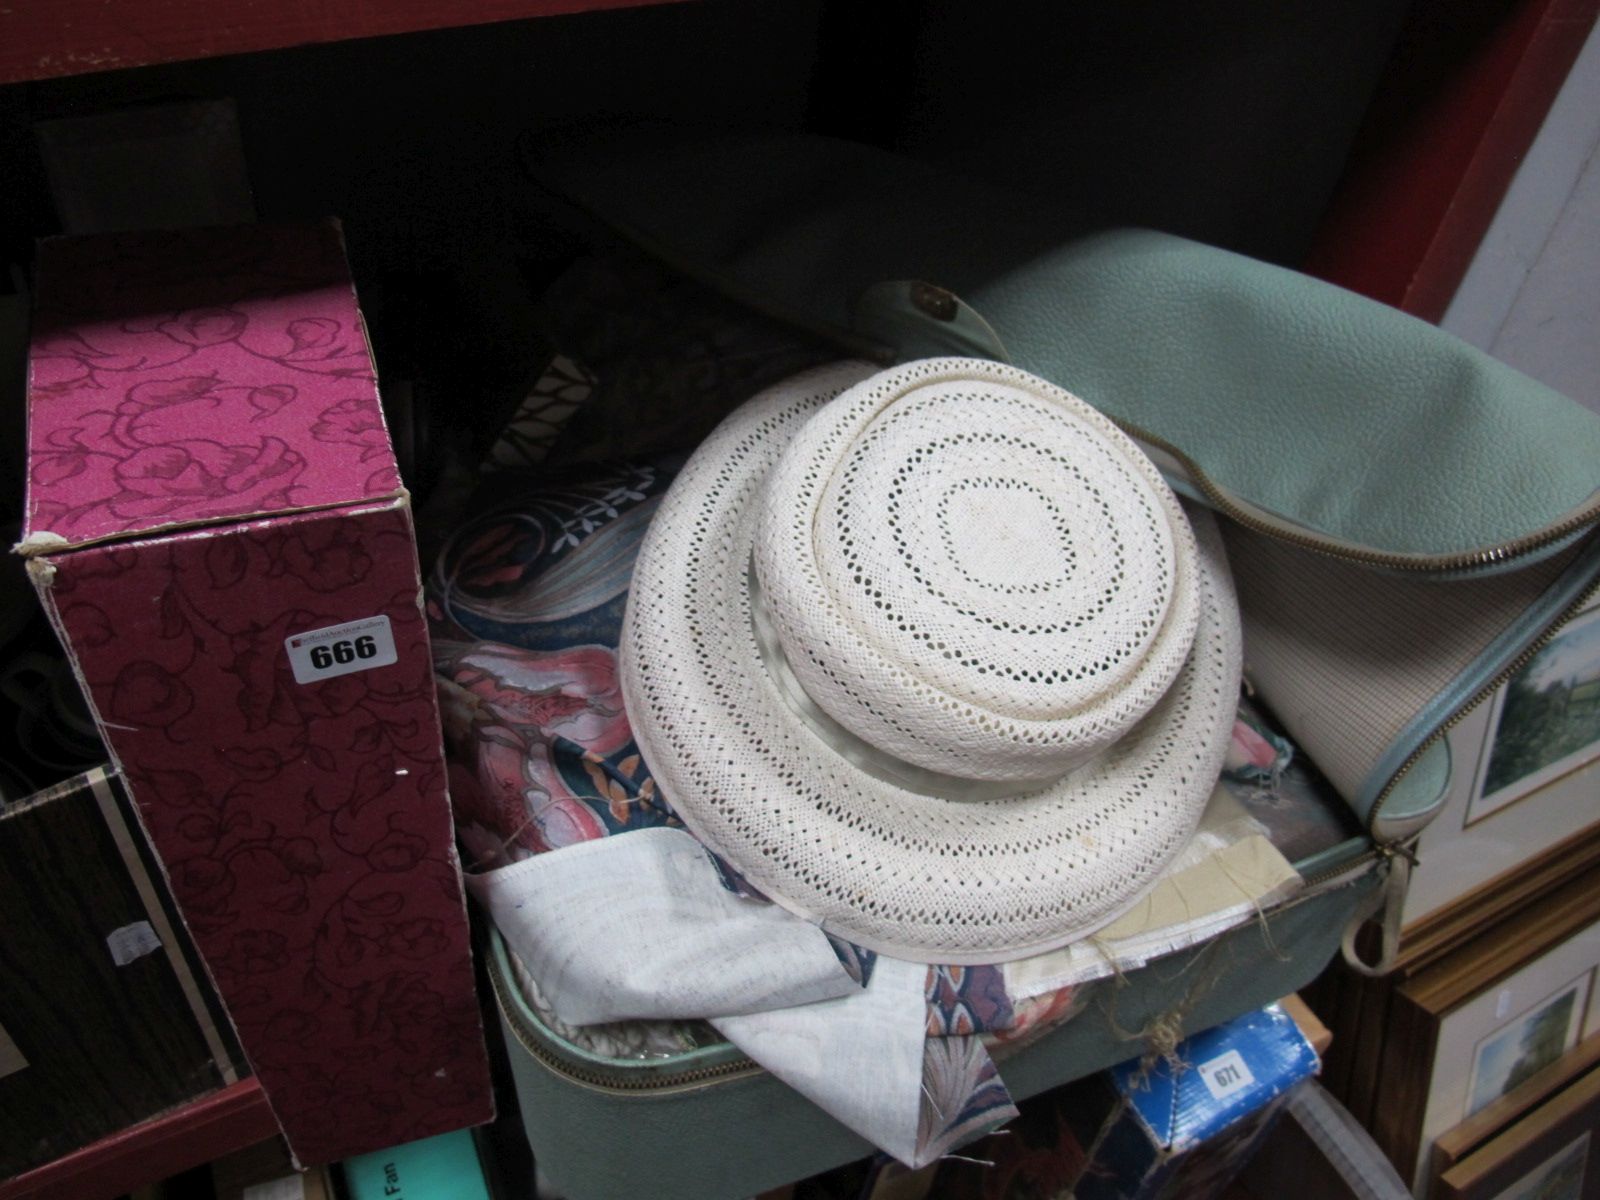 A Quantity of Fabric, material, ladies hat, etc, in case, together with dolls in boxes.